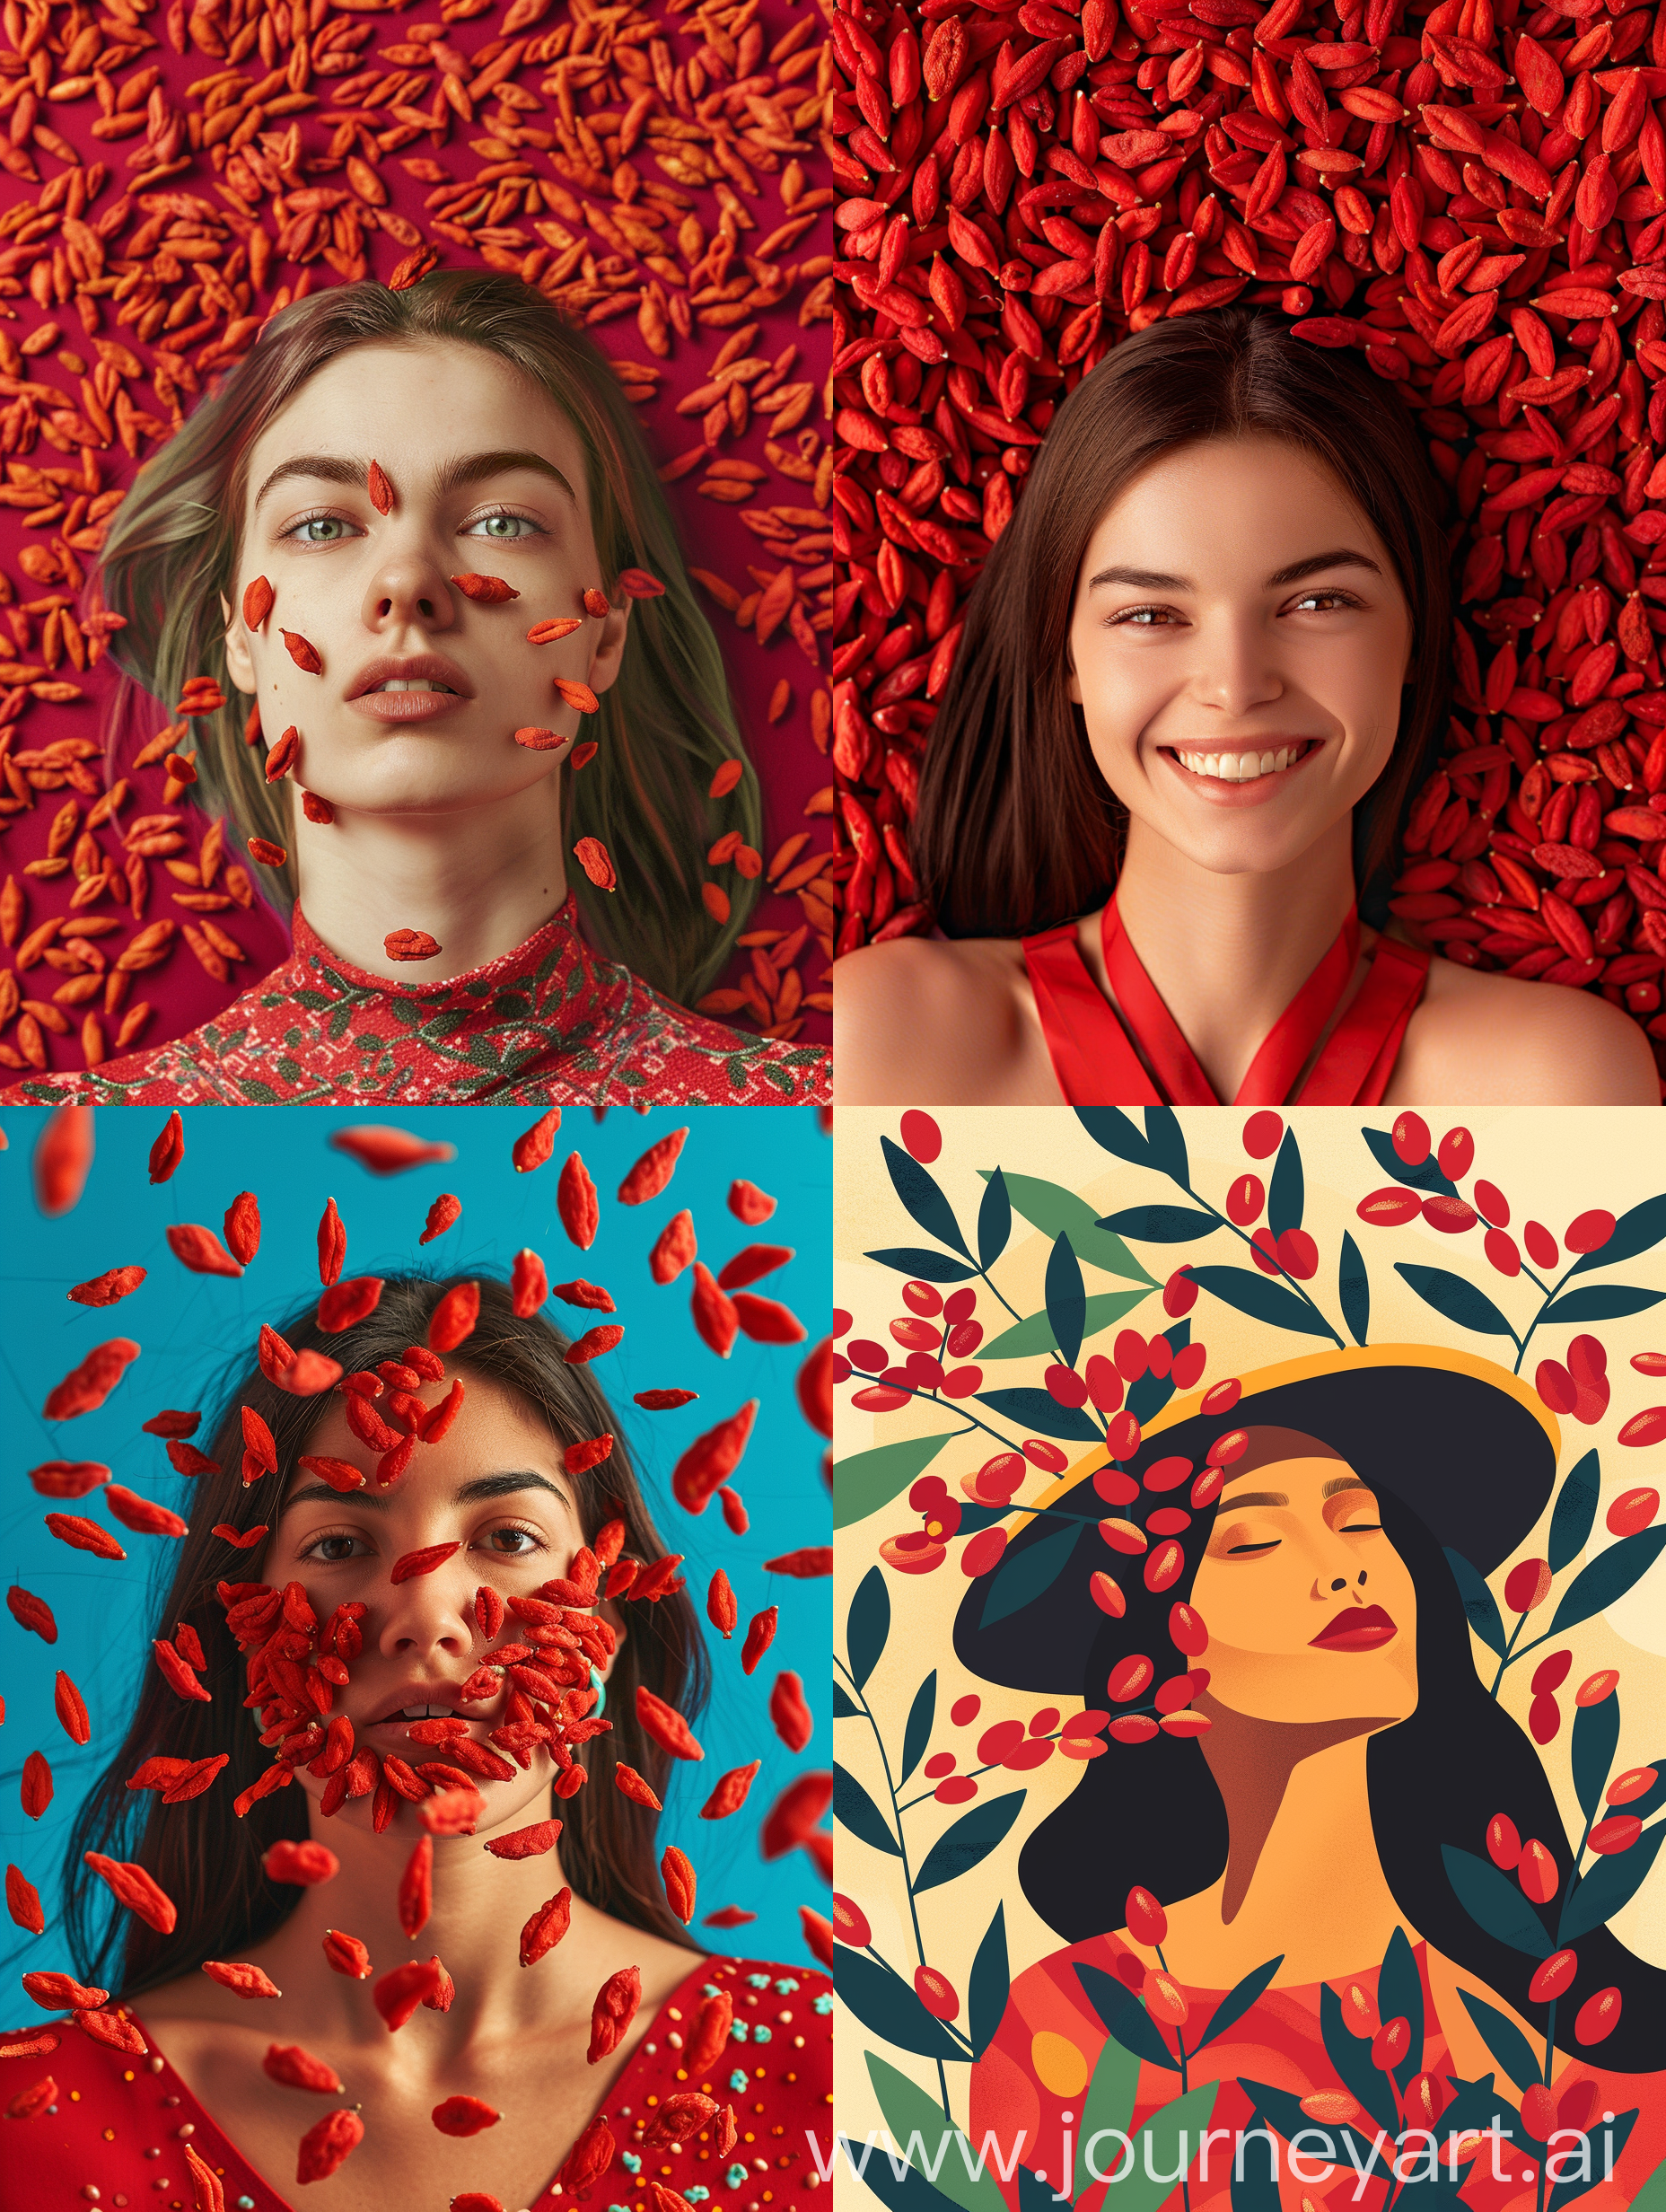 blog banner of an anti-ageing superfood, goji berries. retro & psychedelic theme. Include a woman in the image